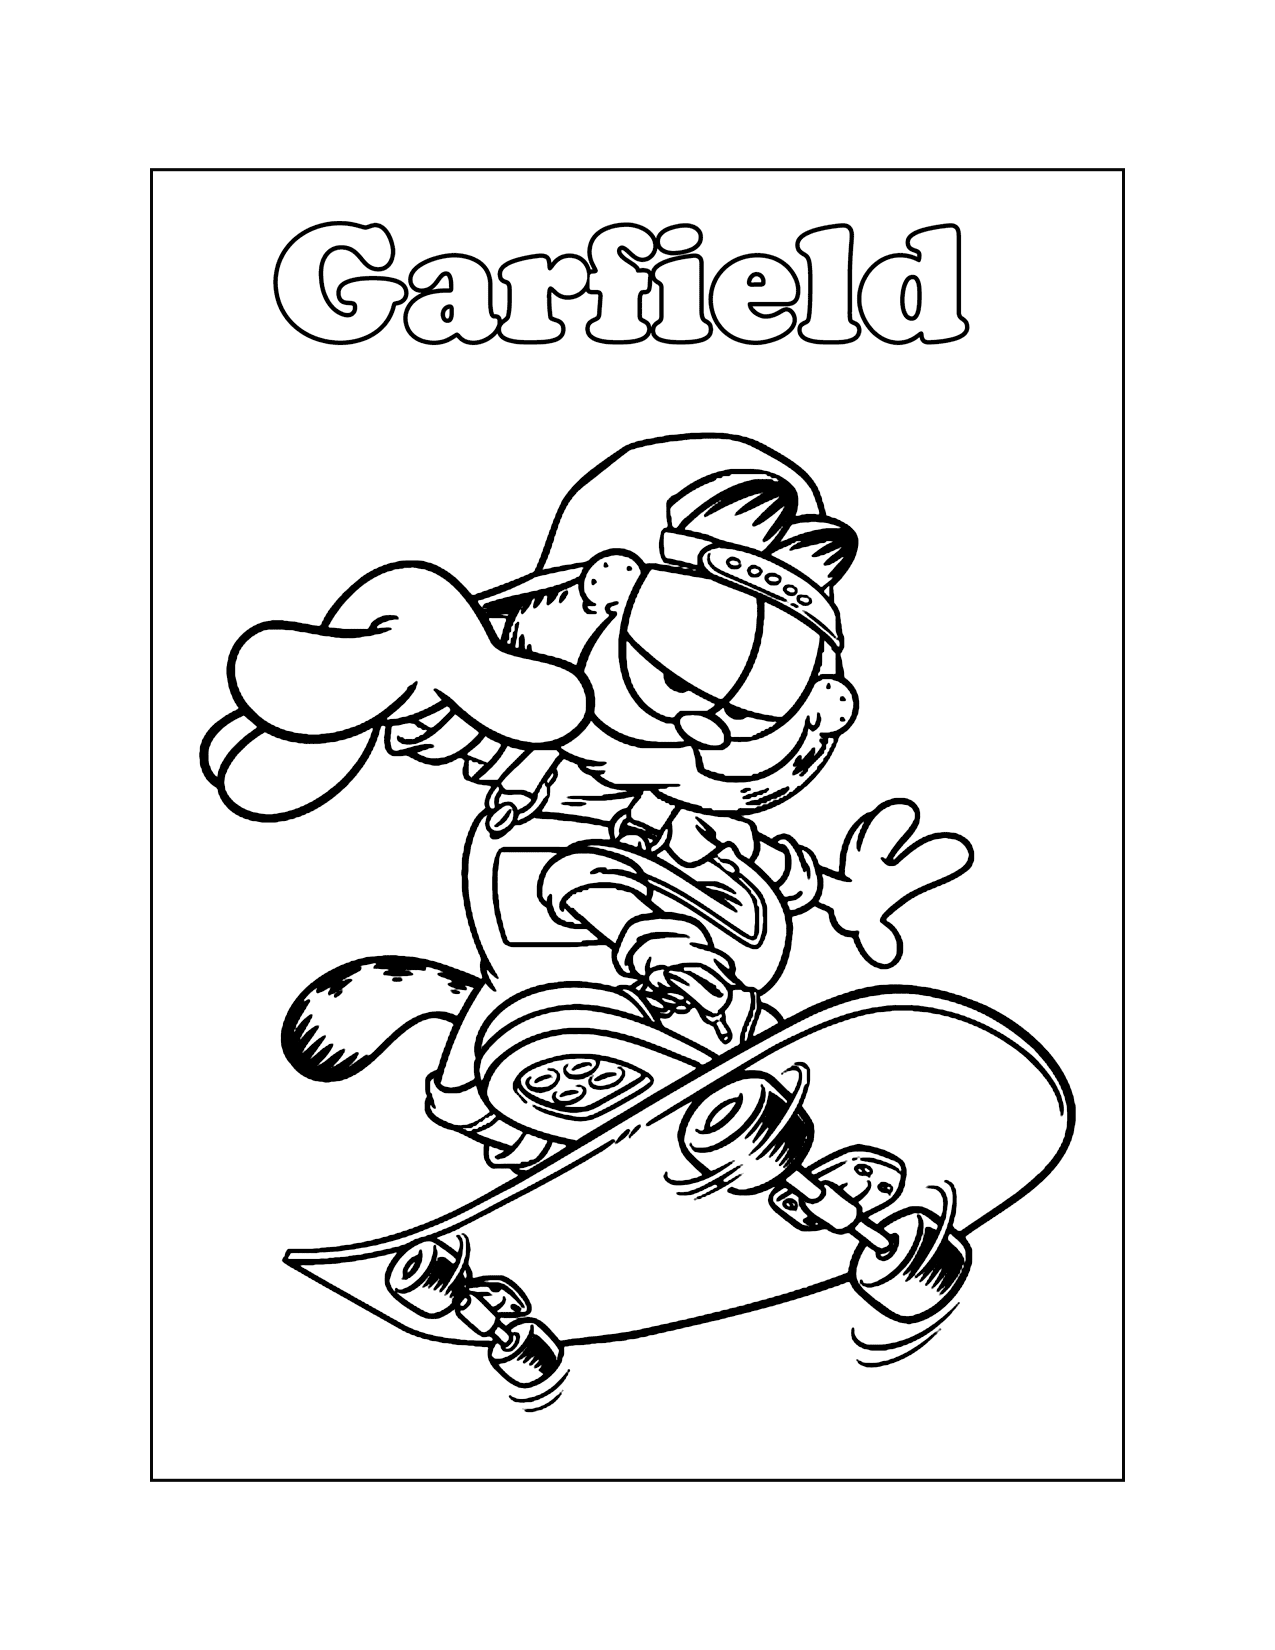 Garfield Skateboarding Coloring Pages